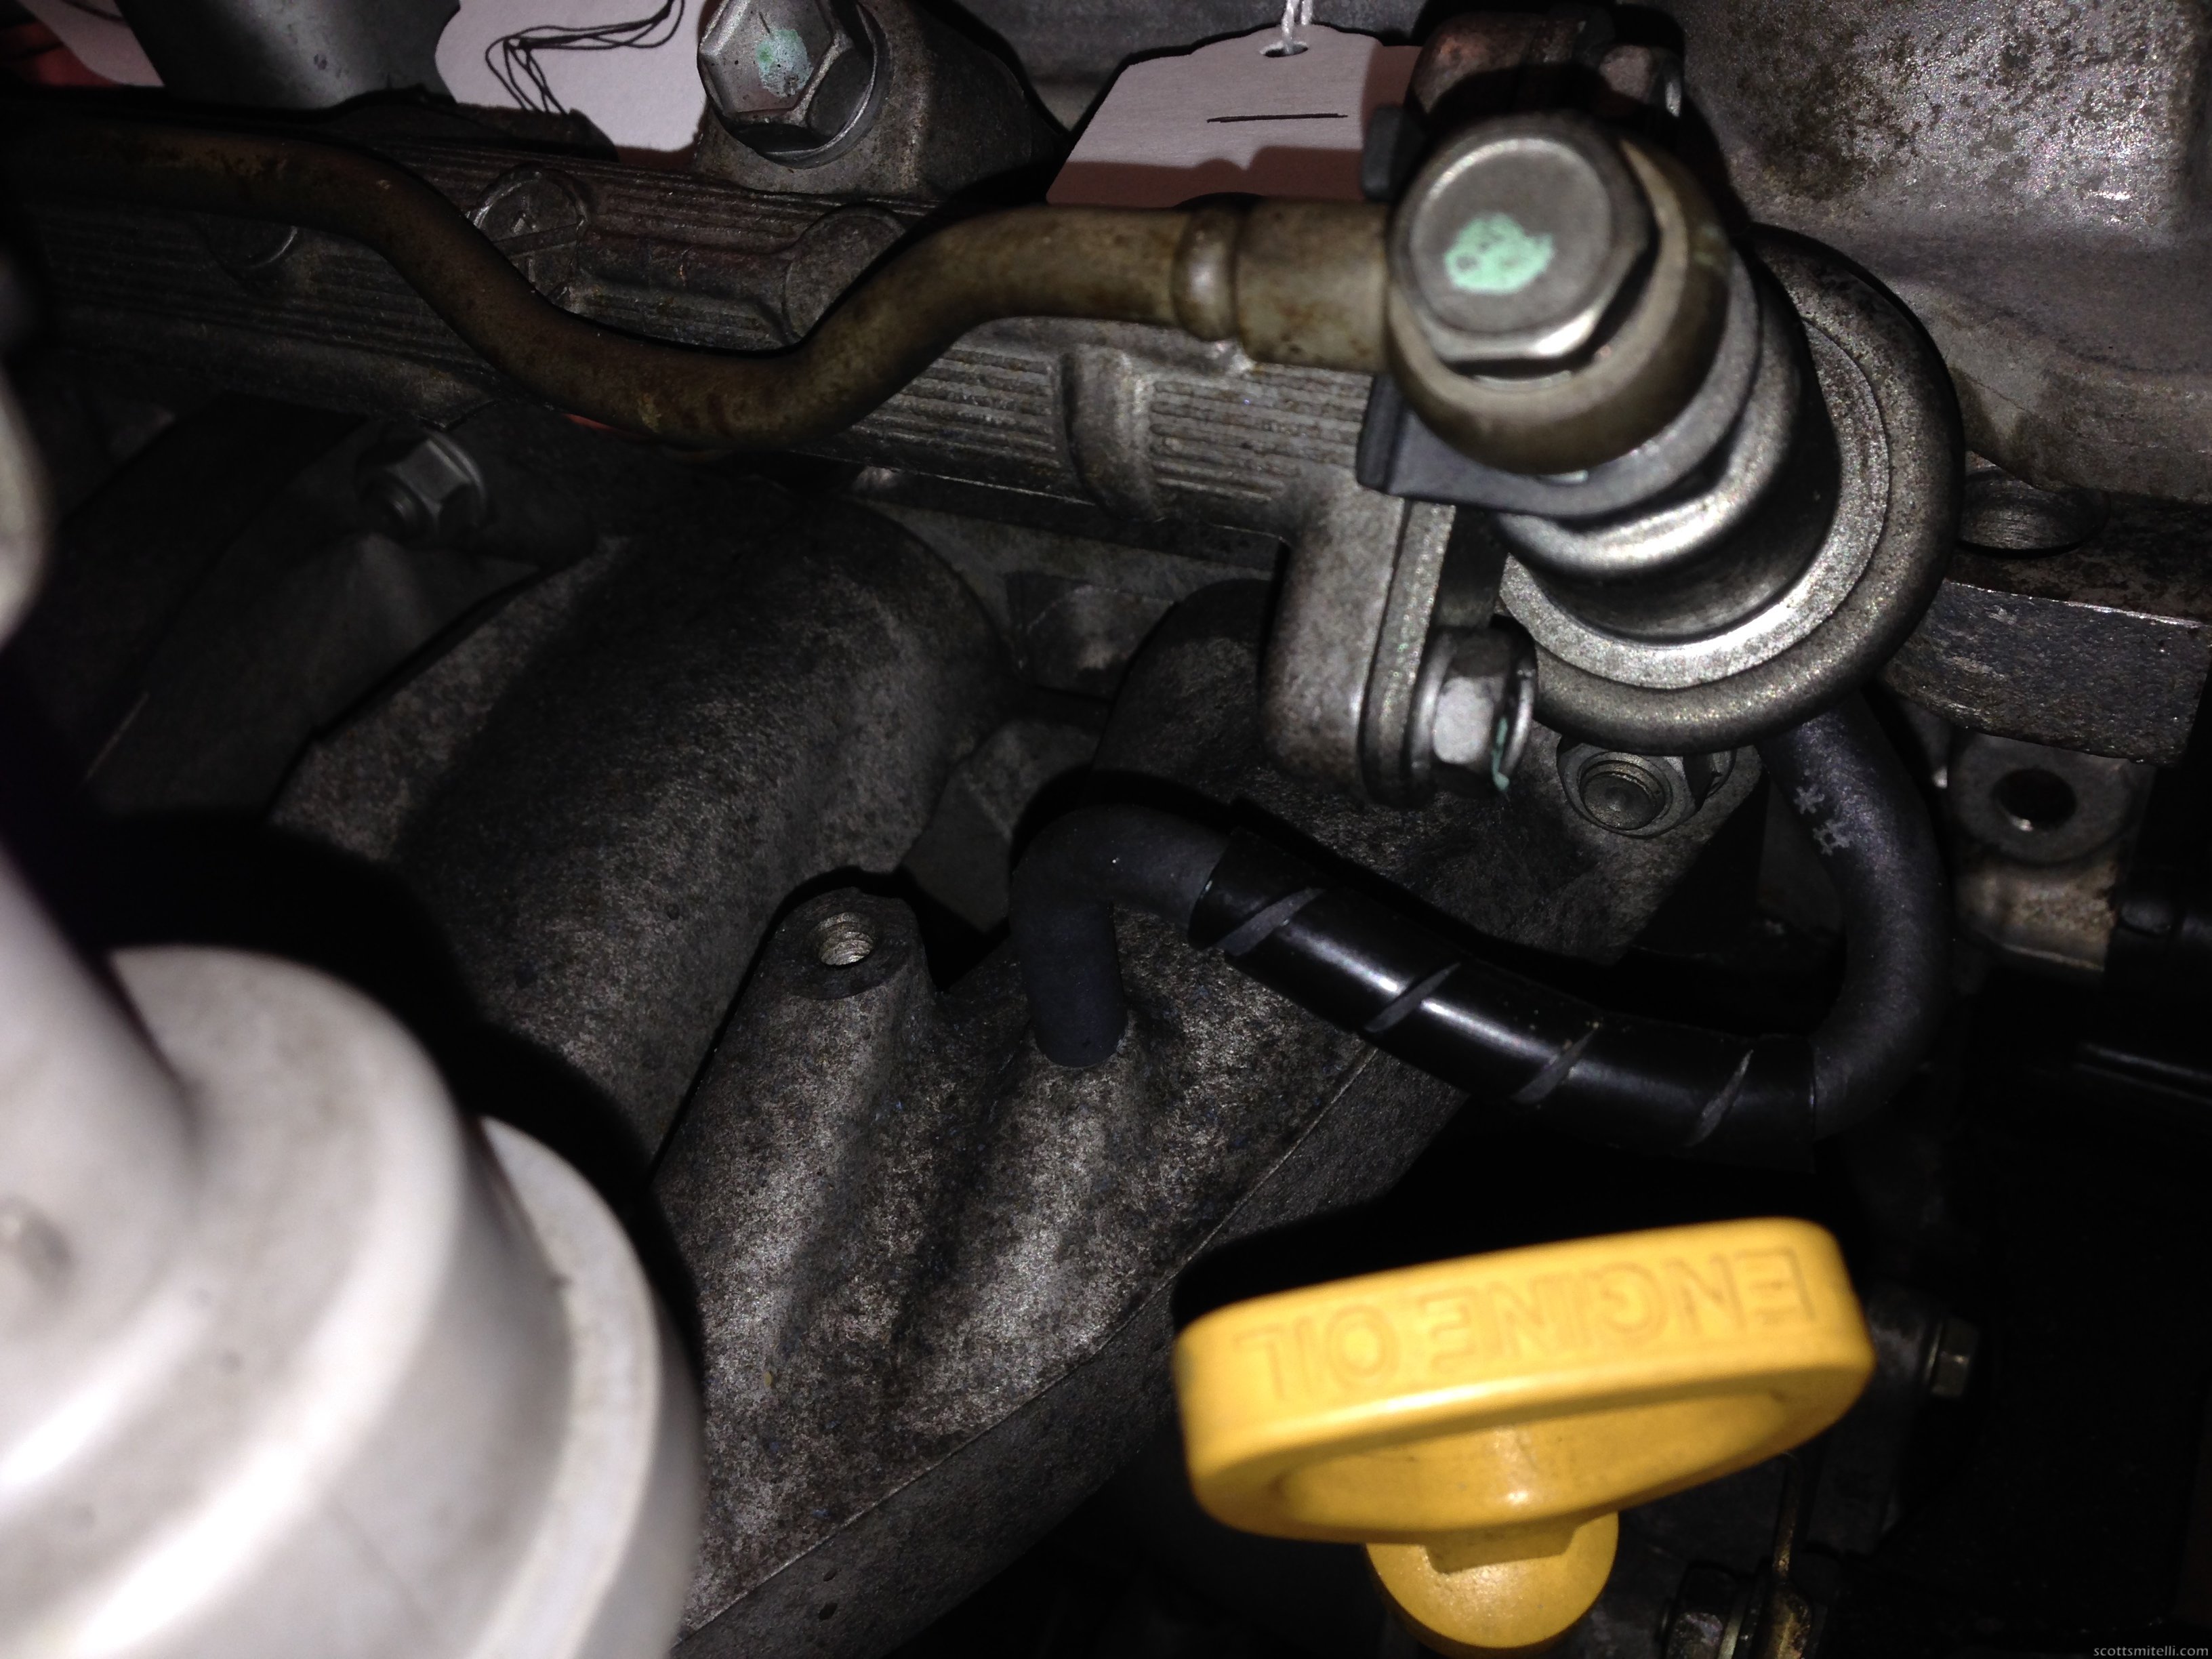 There should be a vacuum valve controlling the fuel pressure regulator, but there is not!